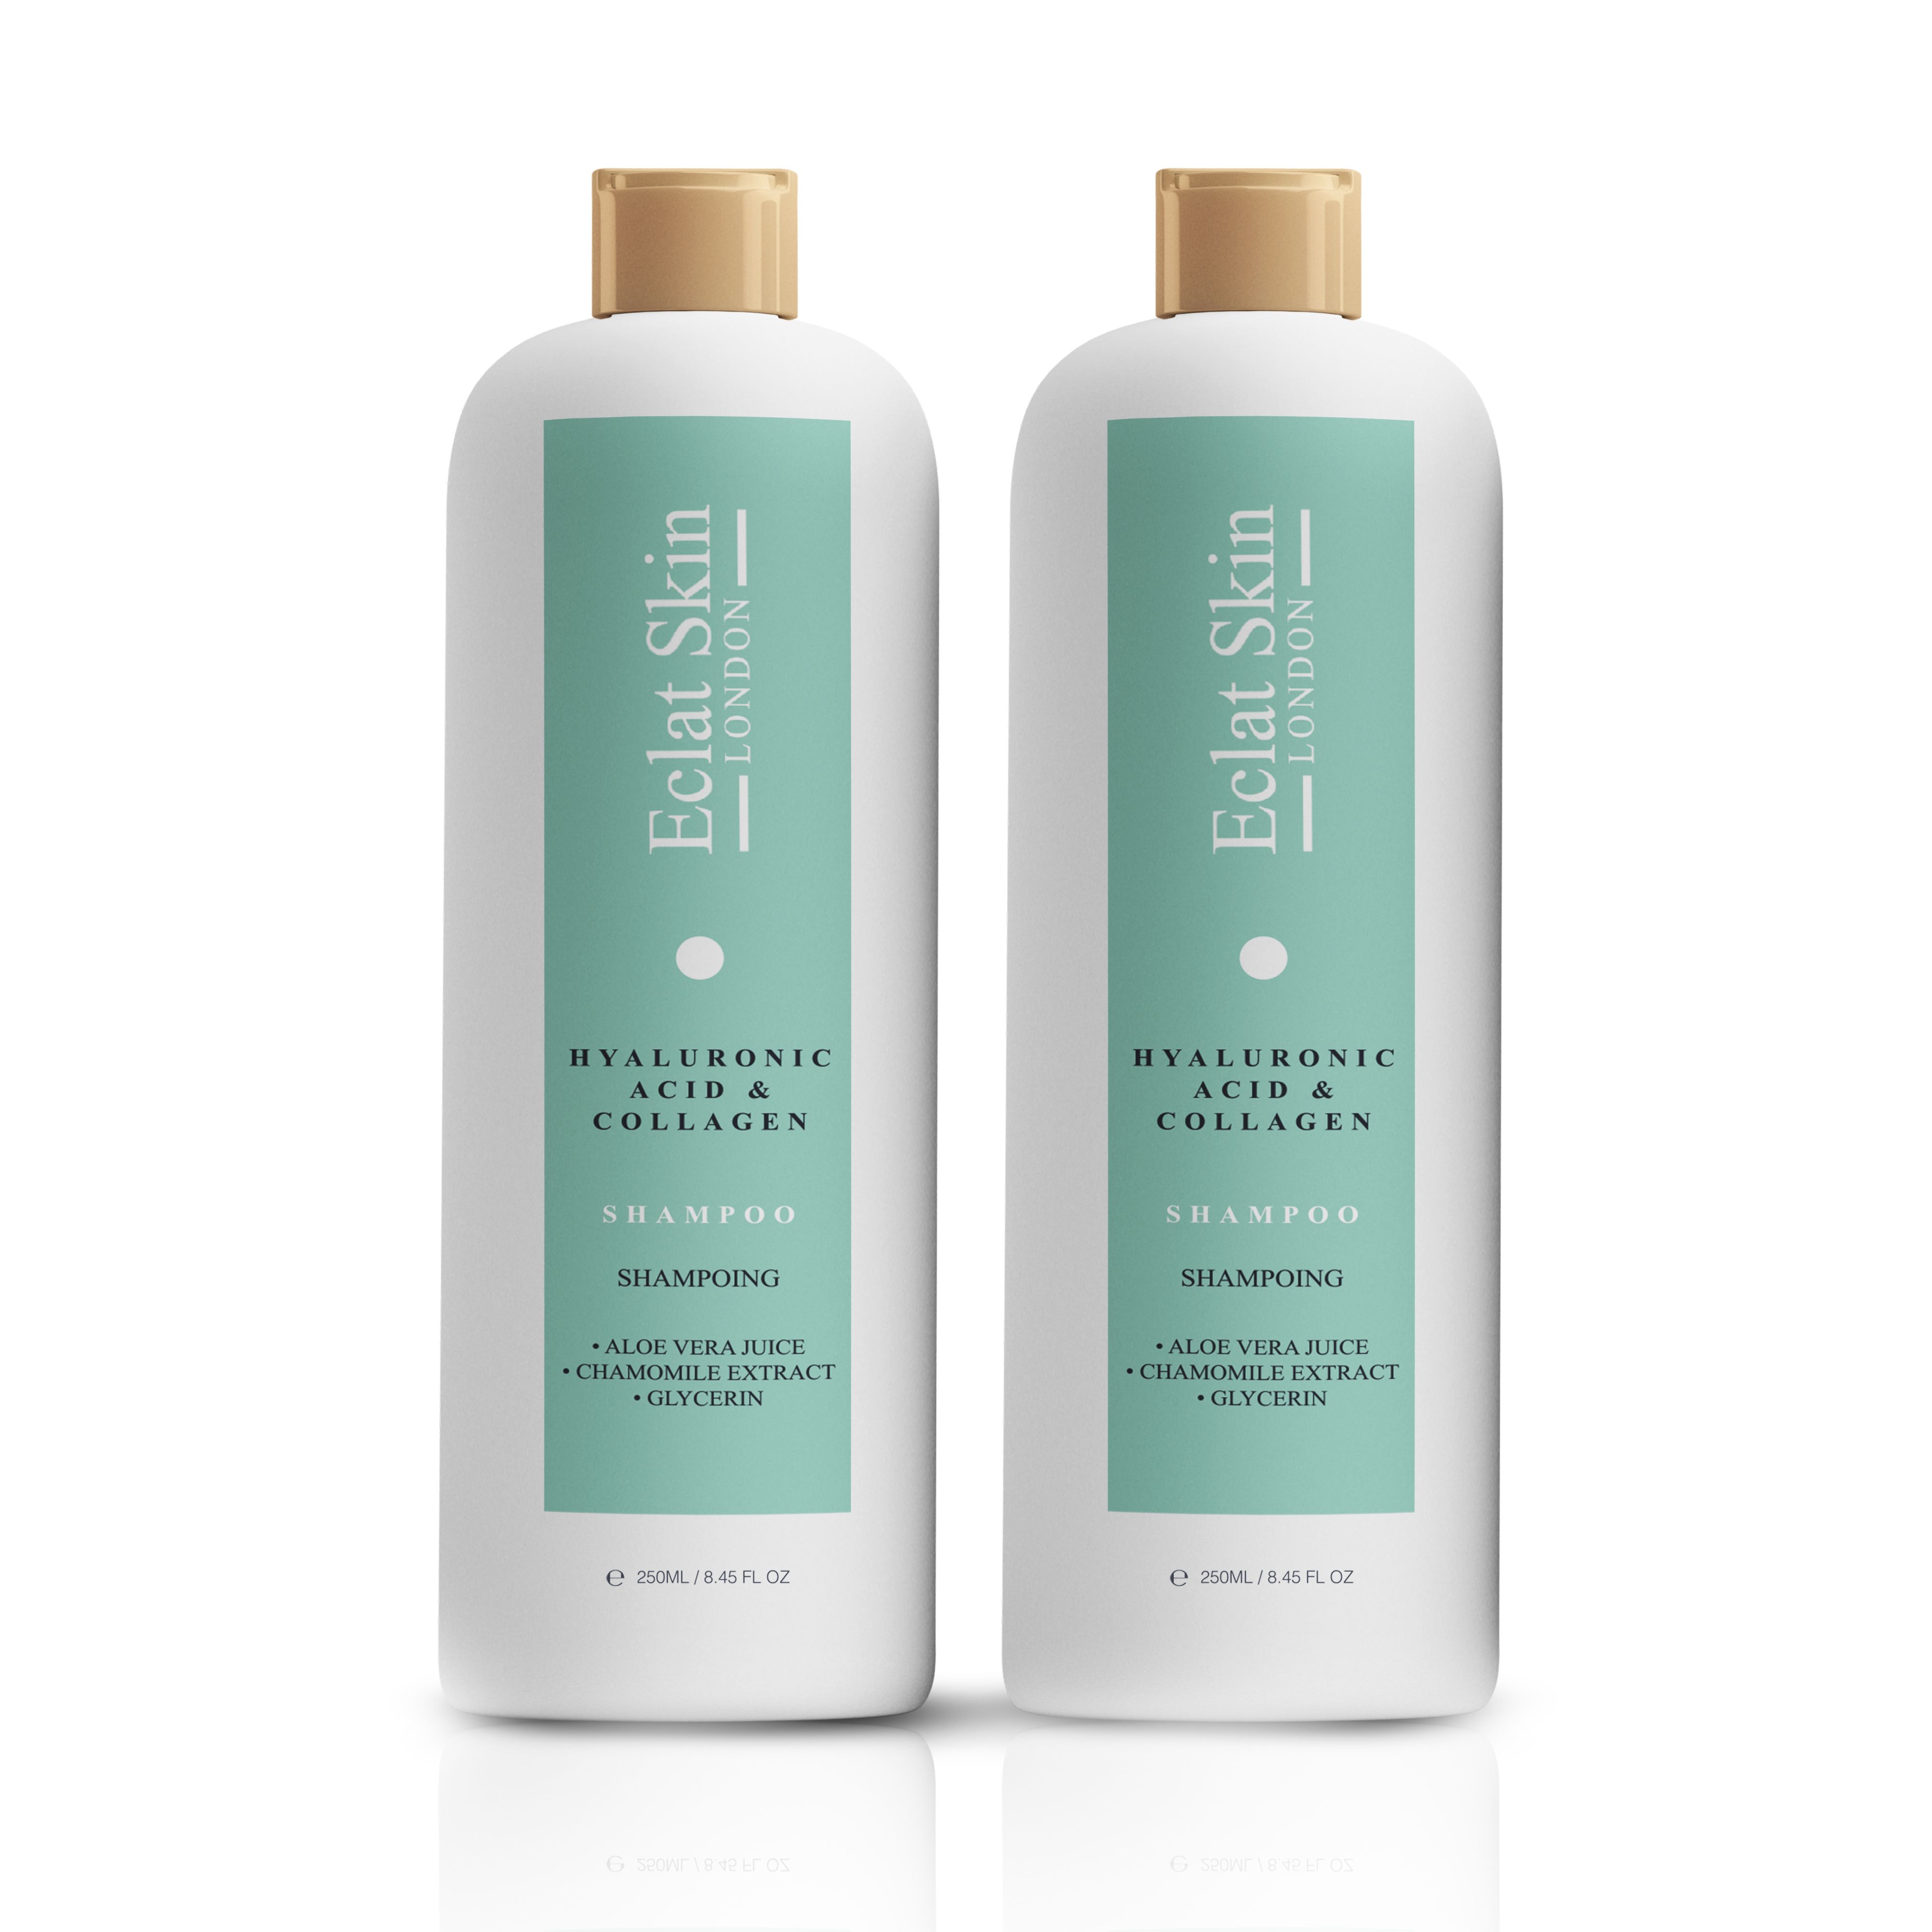 COLLAGEN & HYALURONIC ACID SHAMPOO 250ML
- Hair damage repair shampoo - Instantly cleanses & nourishes the hair - Supercharged with hydrating hyaluronic acid and collagen - Silky gel formula with luxury vanilla scent.